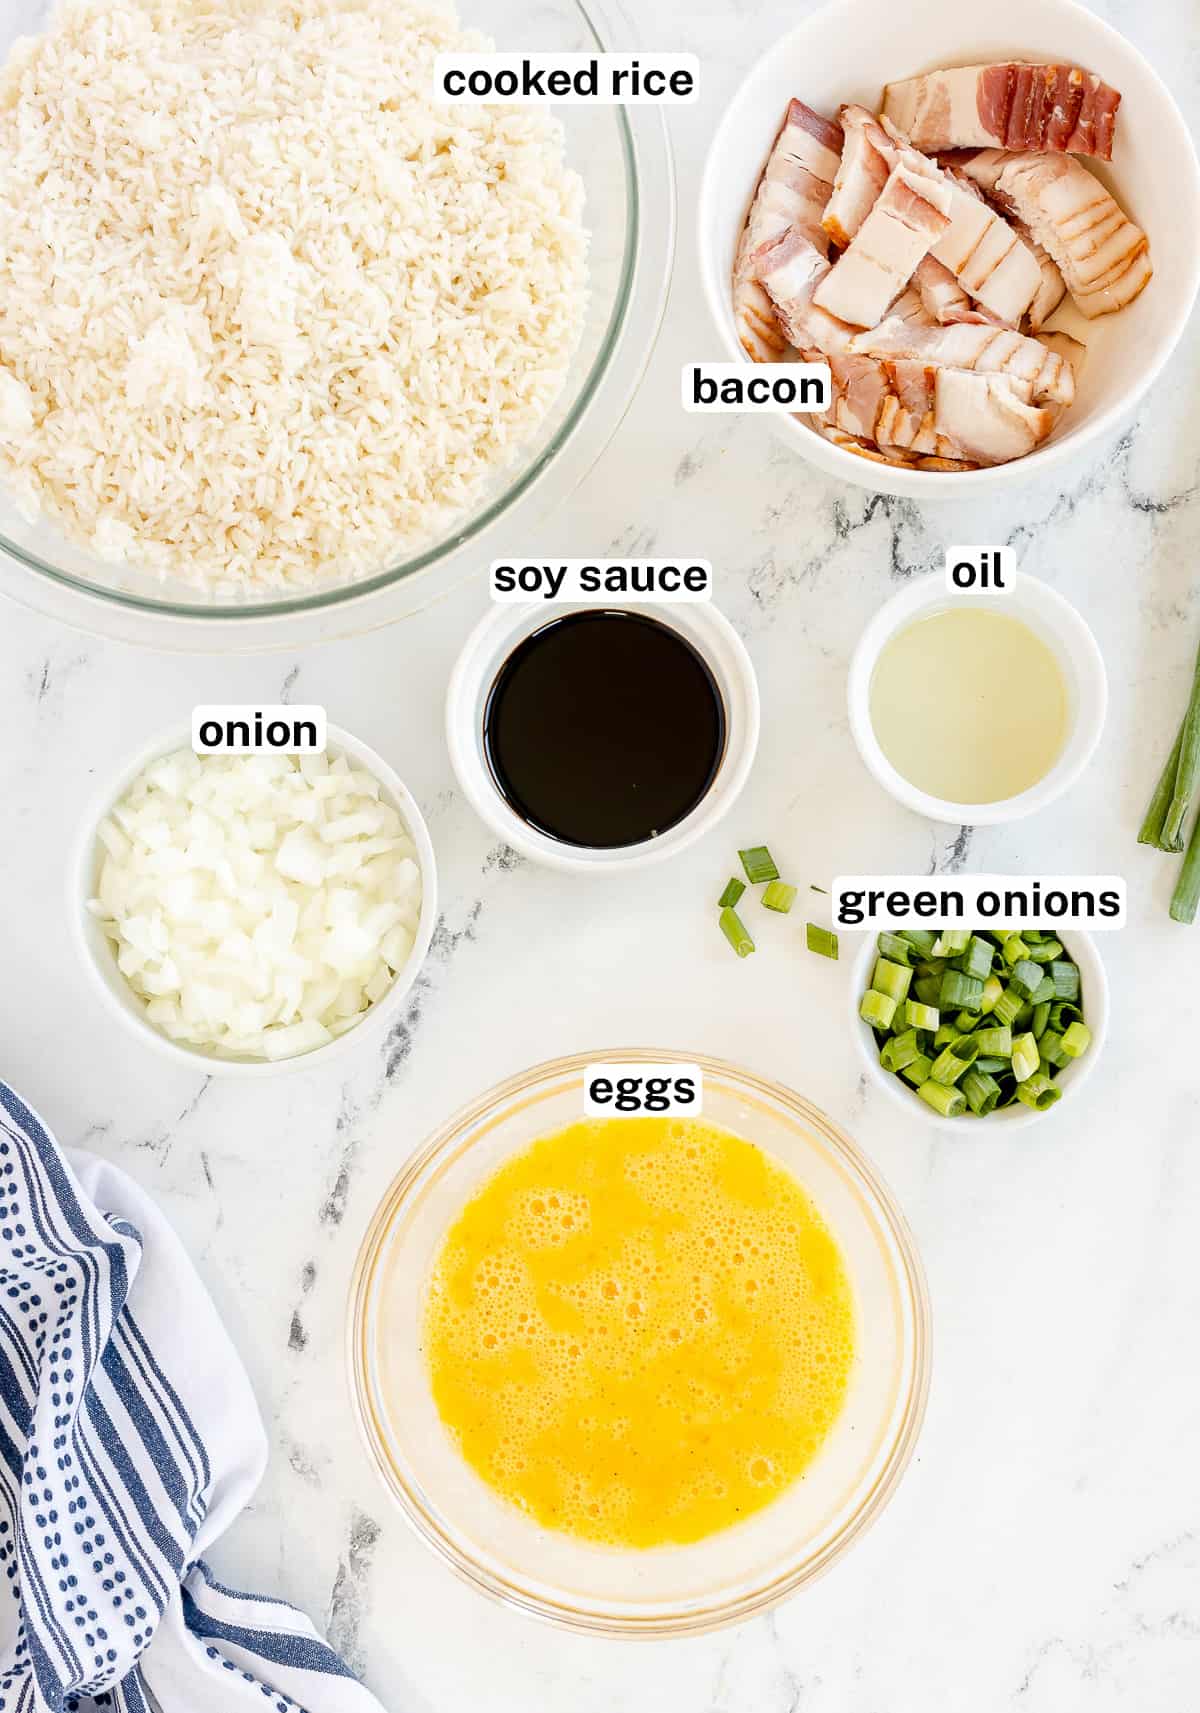 The ingredients for Bacon and Egg Fried Rice with text.